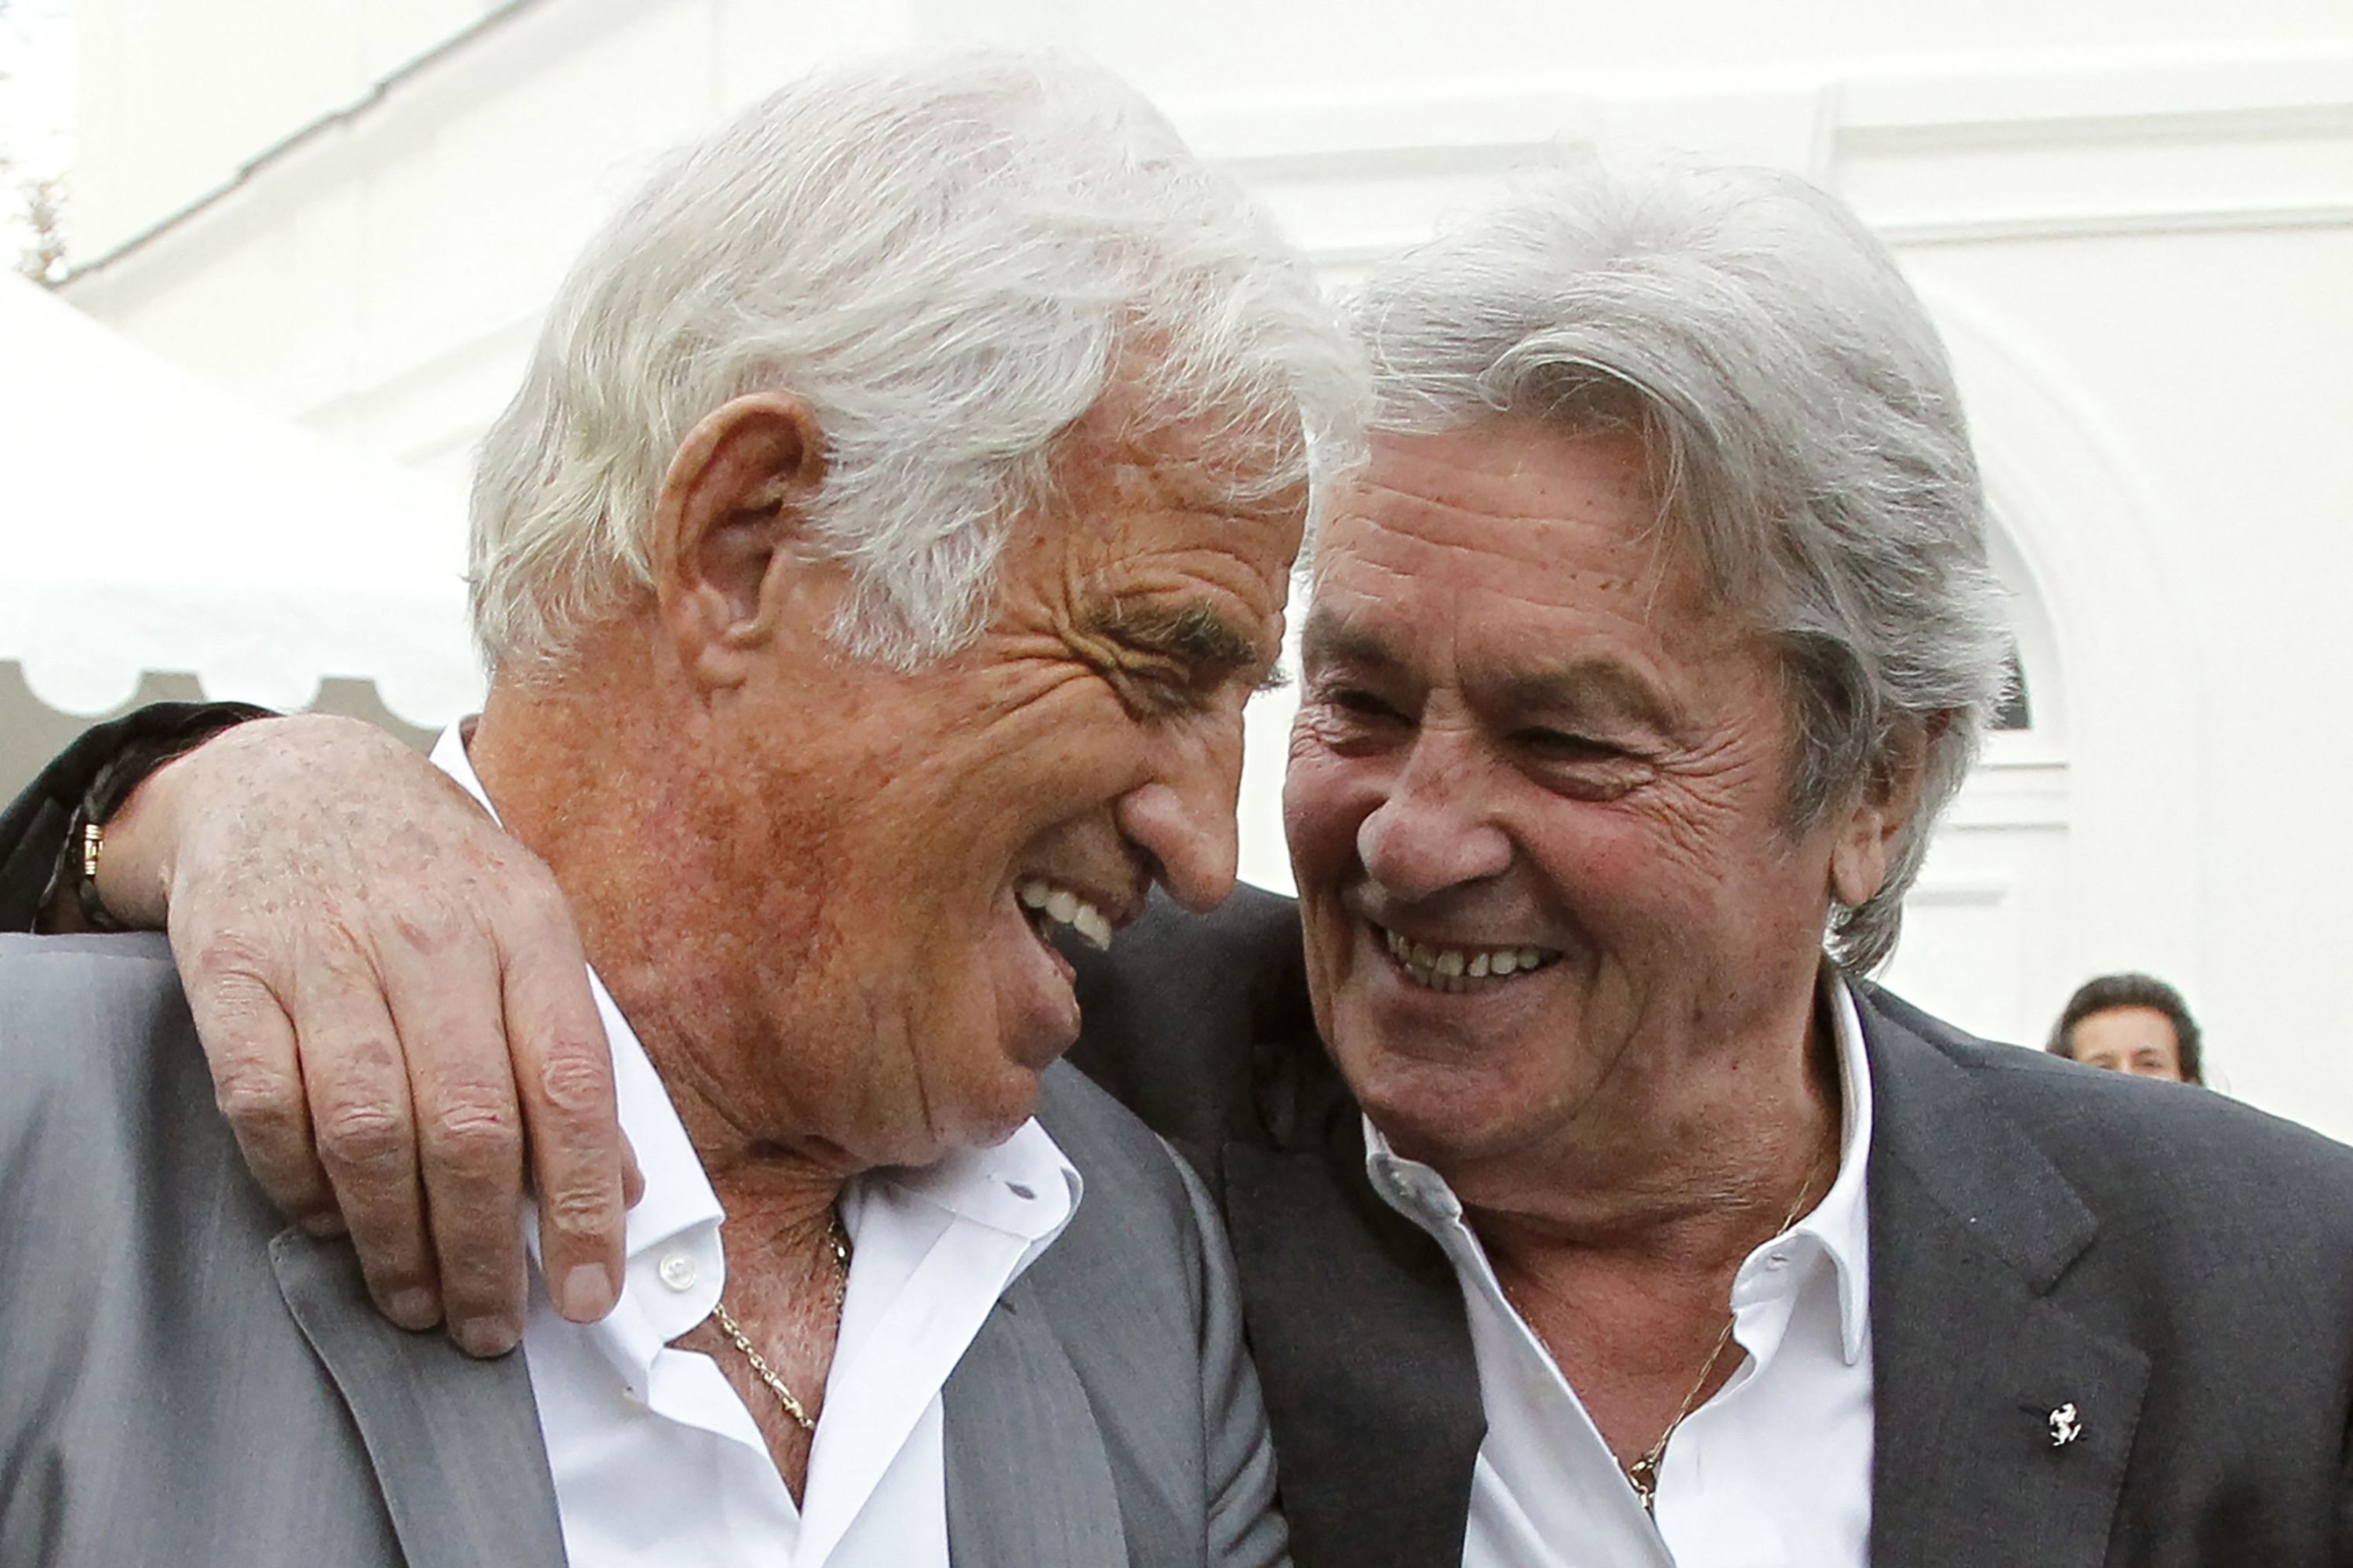 French actor Alain Delon (R) puts his arm around fellow actor Jean-Paul Belmondo in Boulogne-Billancourt during the inauguration of the Paul Belmondo museum dedicated to the work of Jean-Paul Belmondo